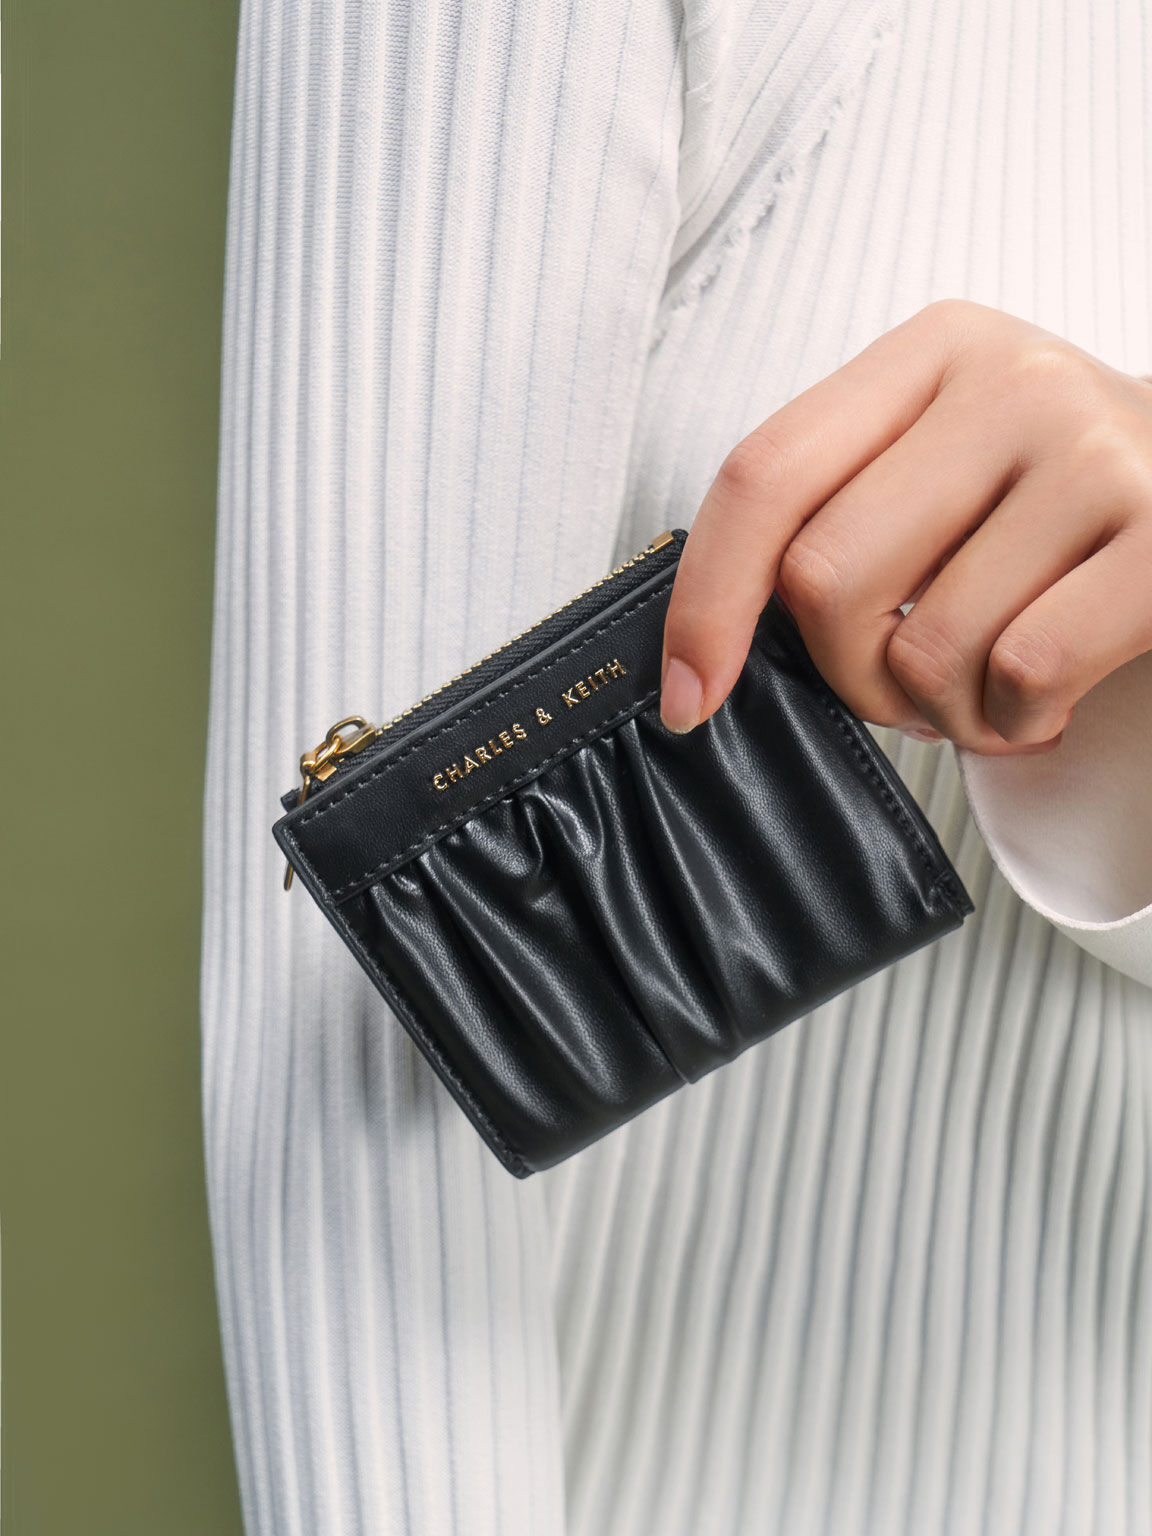 Women's Wallets | Shop Exclusive Styles - CHARLES & KEITH International